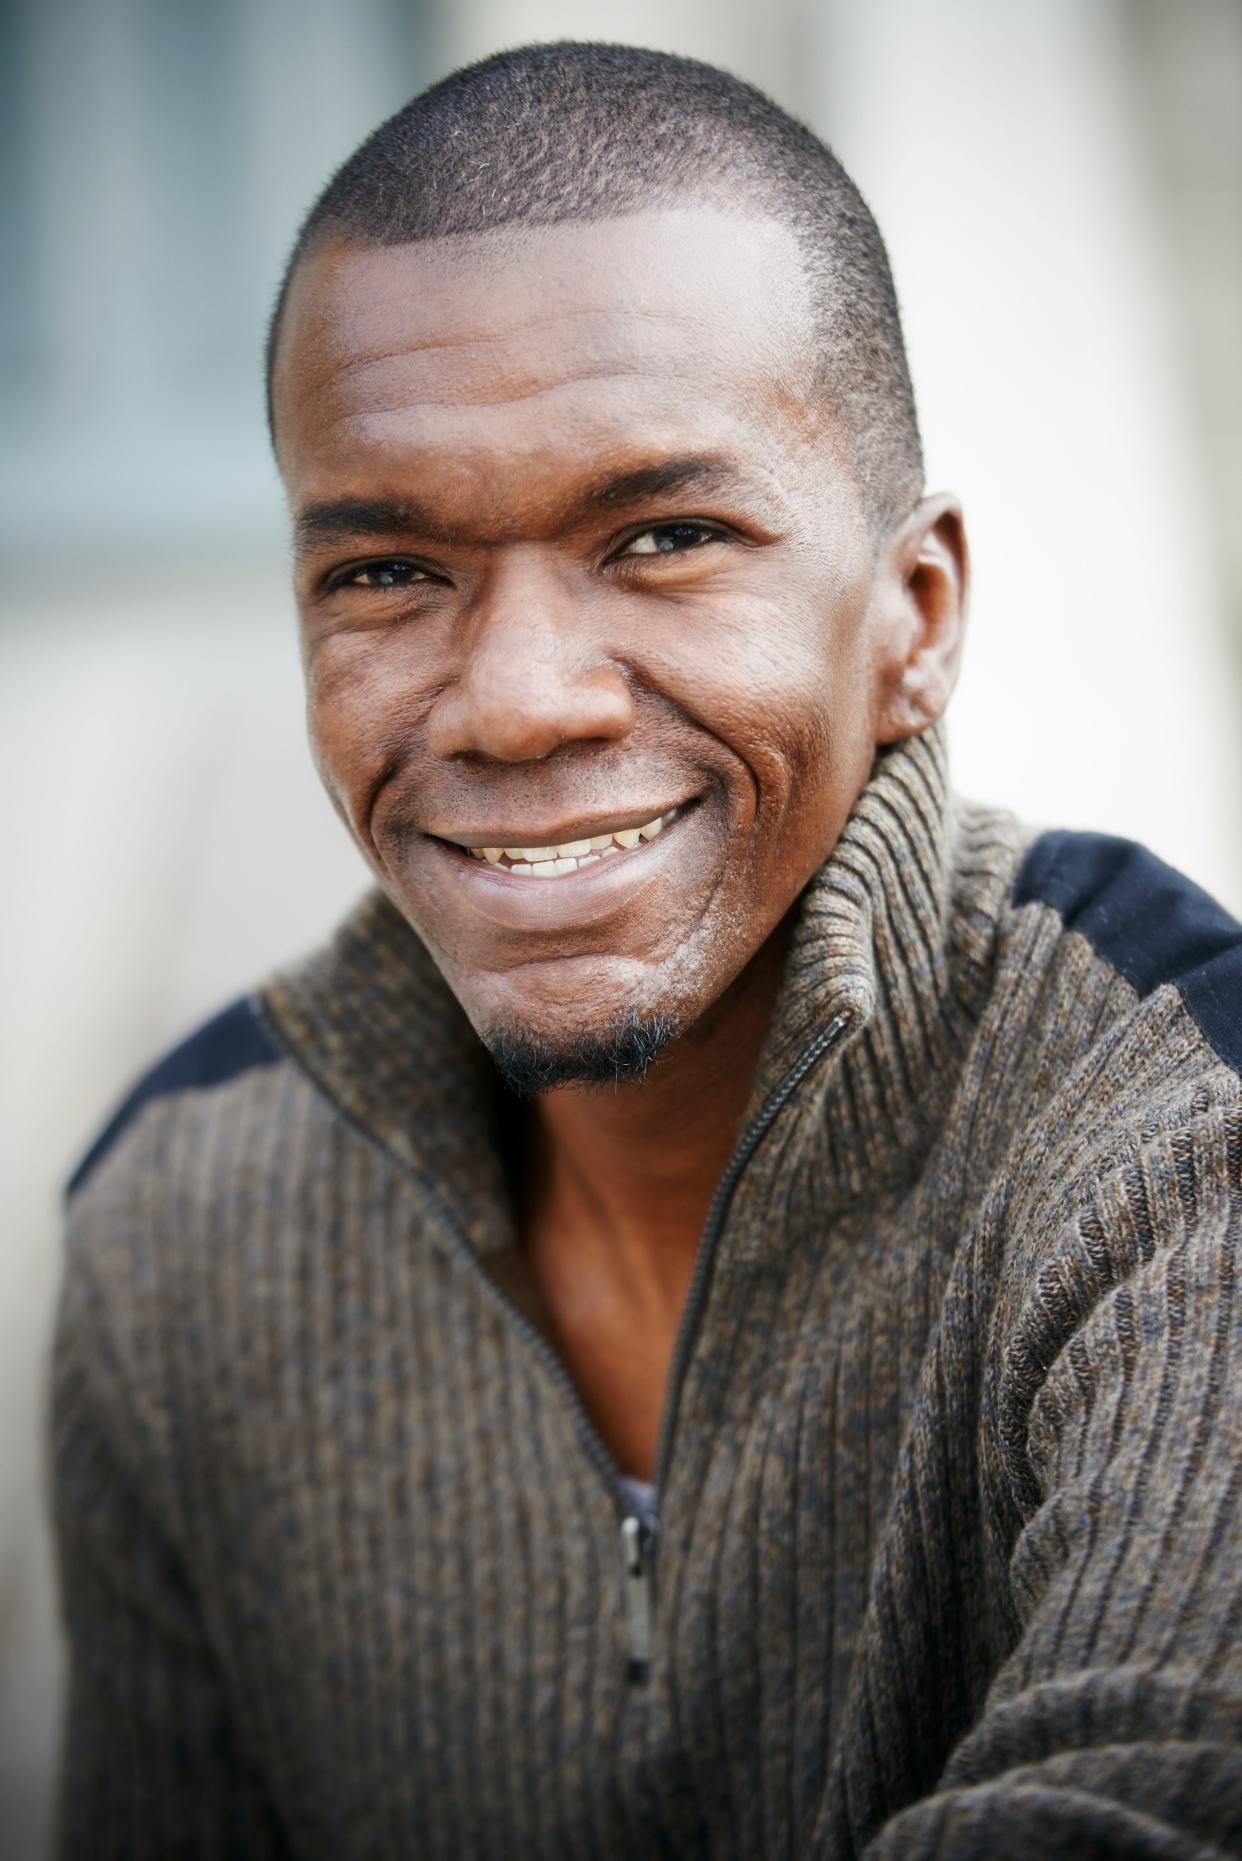 Award-winning author Jason Mott, whose 2013 debut novel, "The Returned," was adapted into the ABC television series "Resurrection." will discuss "Exploring Identity, Love, and Being Black in America in Fiction Writing" online via the Campbell County Public Library on Feb. 20.